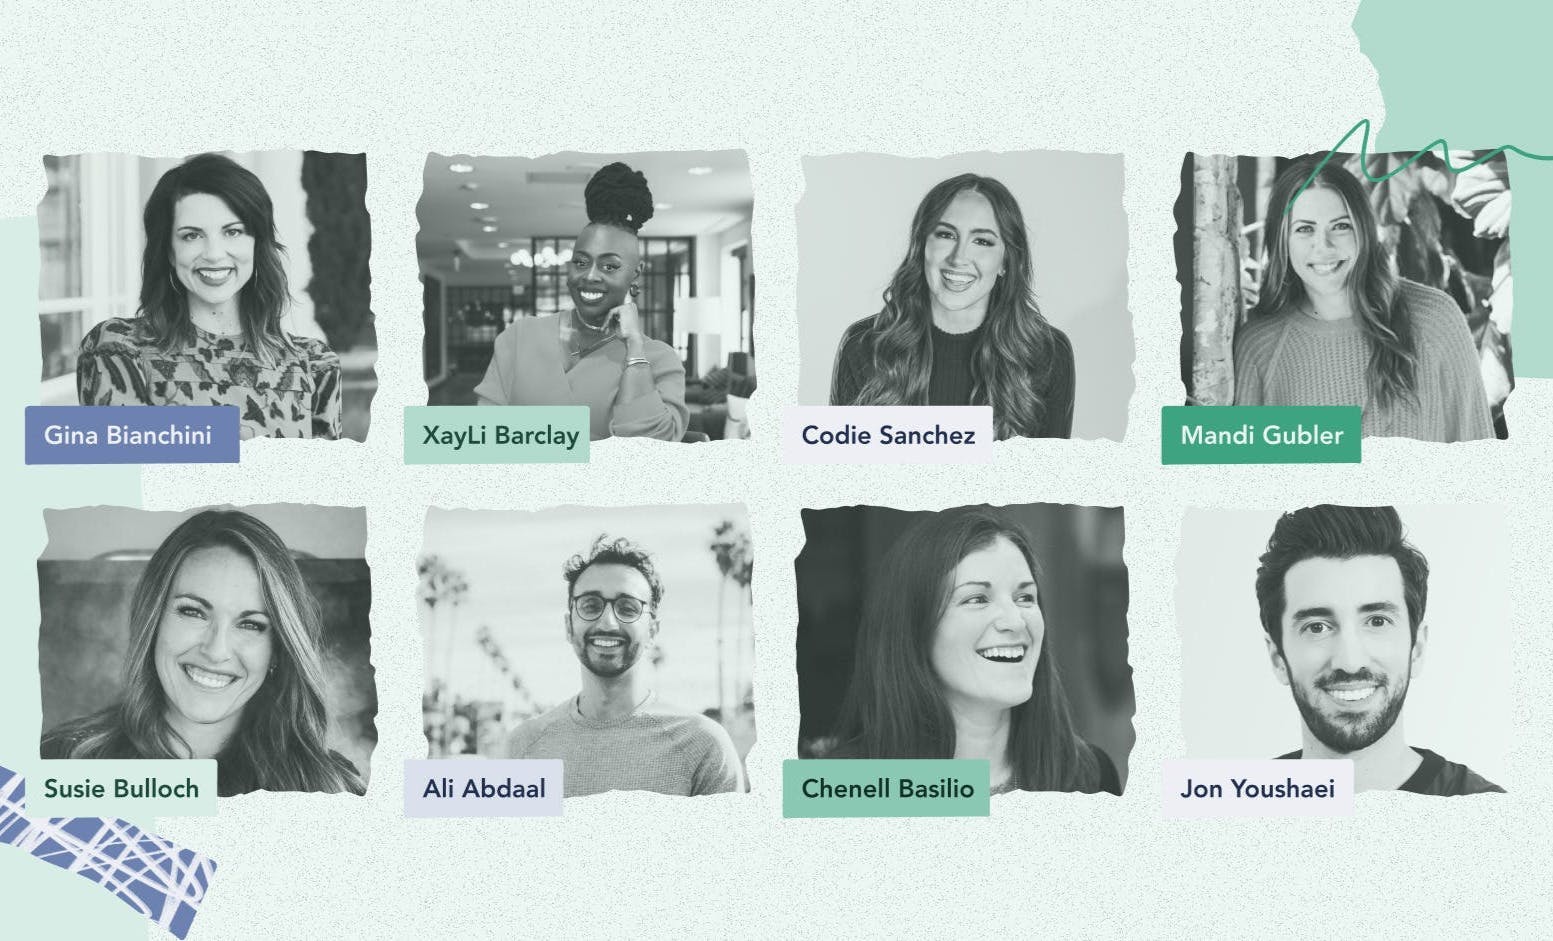 Grid of Craft + Commerce speakers, including Ali Abdaal, Chenell Basilio, Mandi Gubler, Jon Youshaei, Codie Sanchez, XayLi Barclay, Susie Bulloch, and Gina Bianchini [See the speakers]